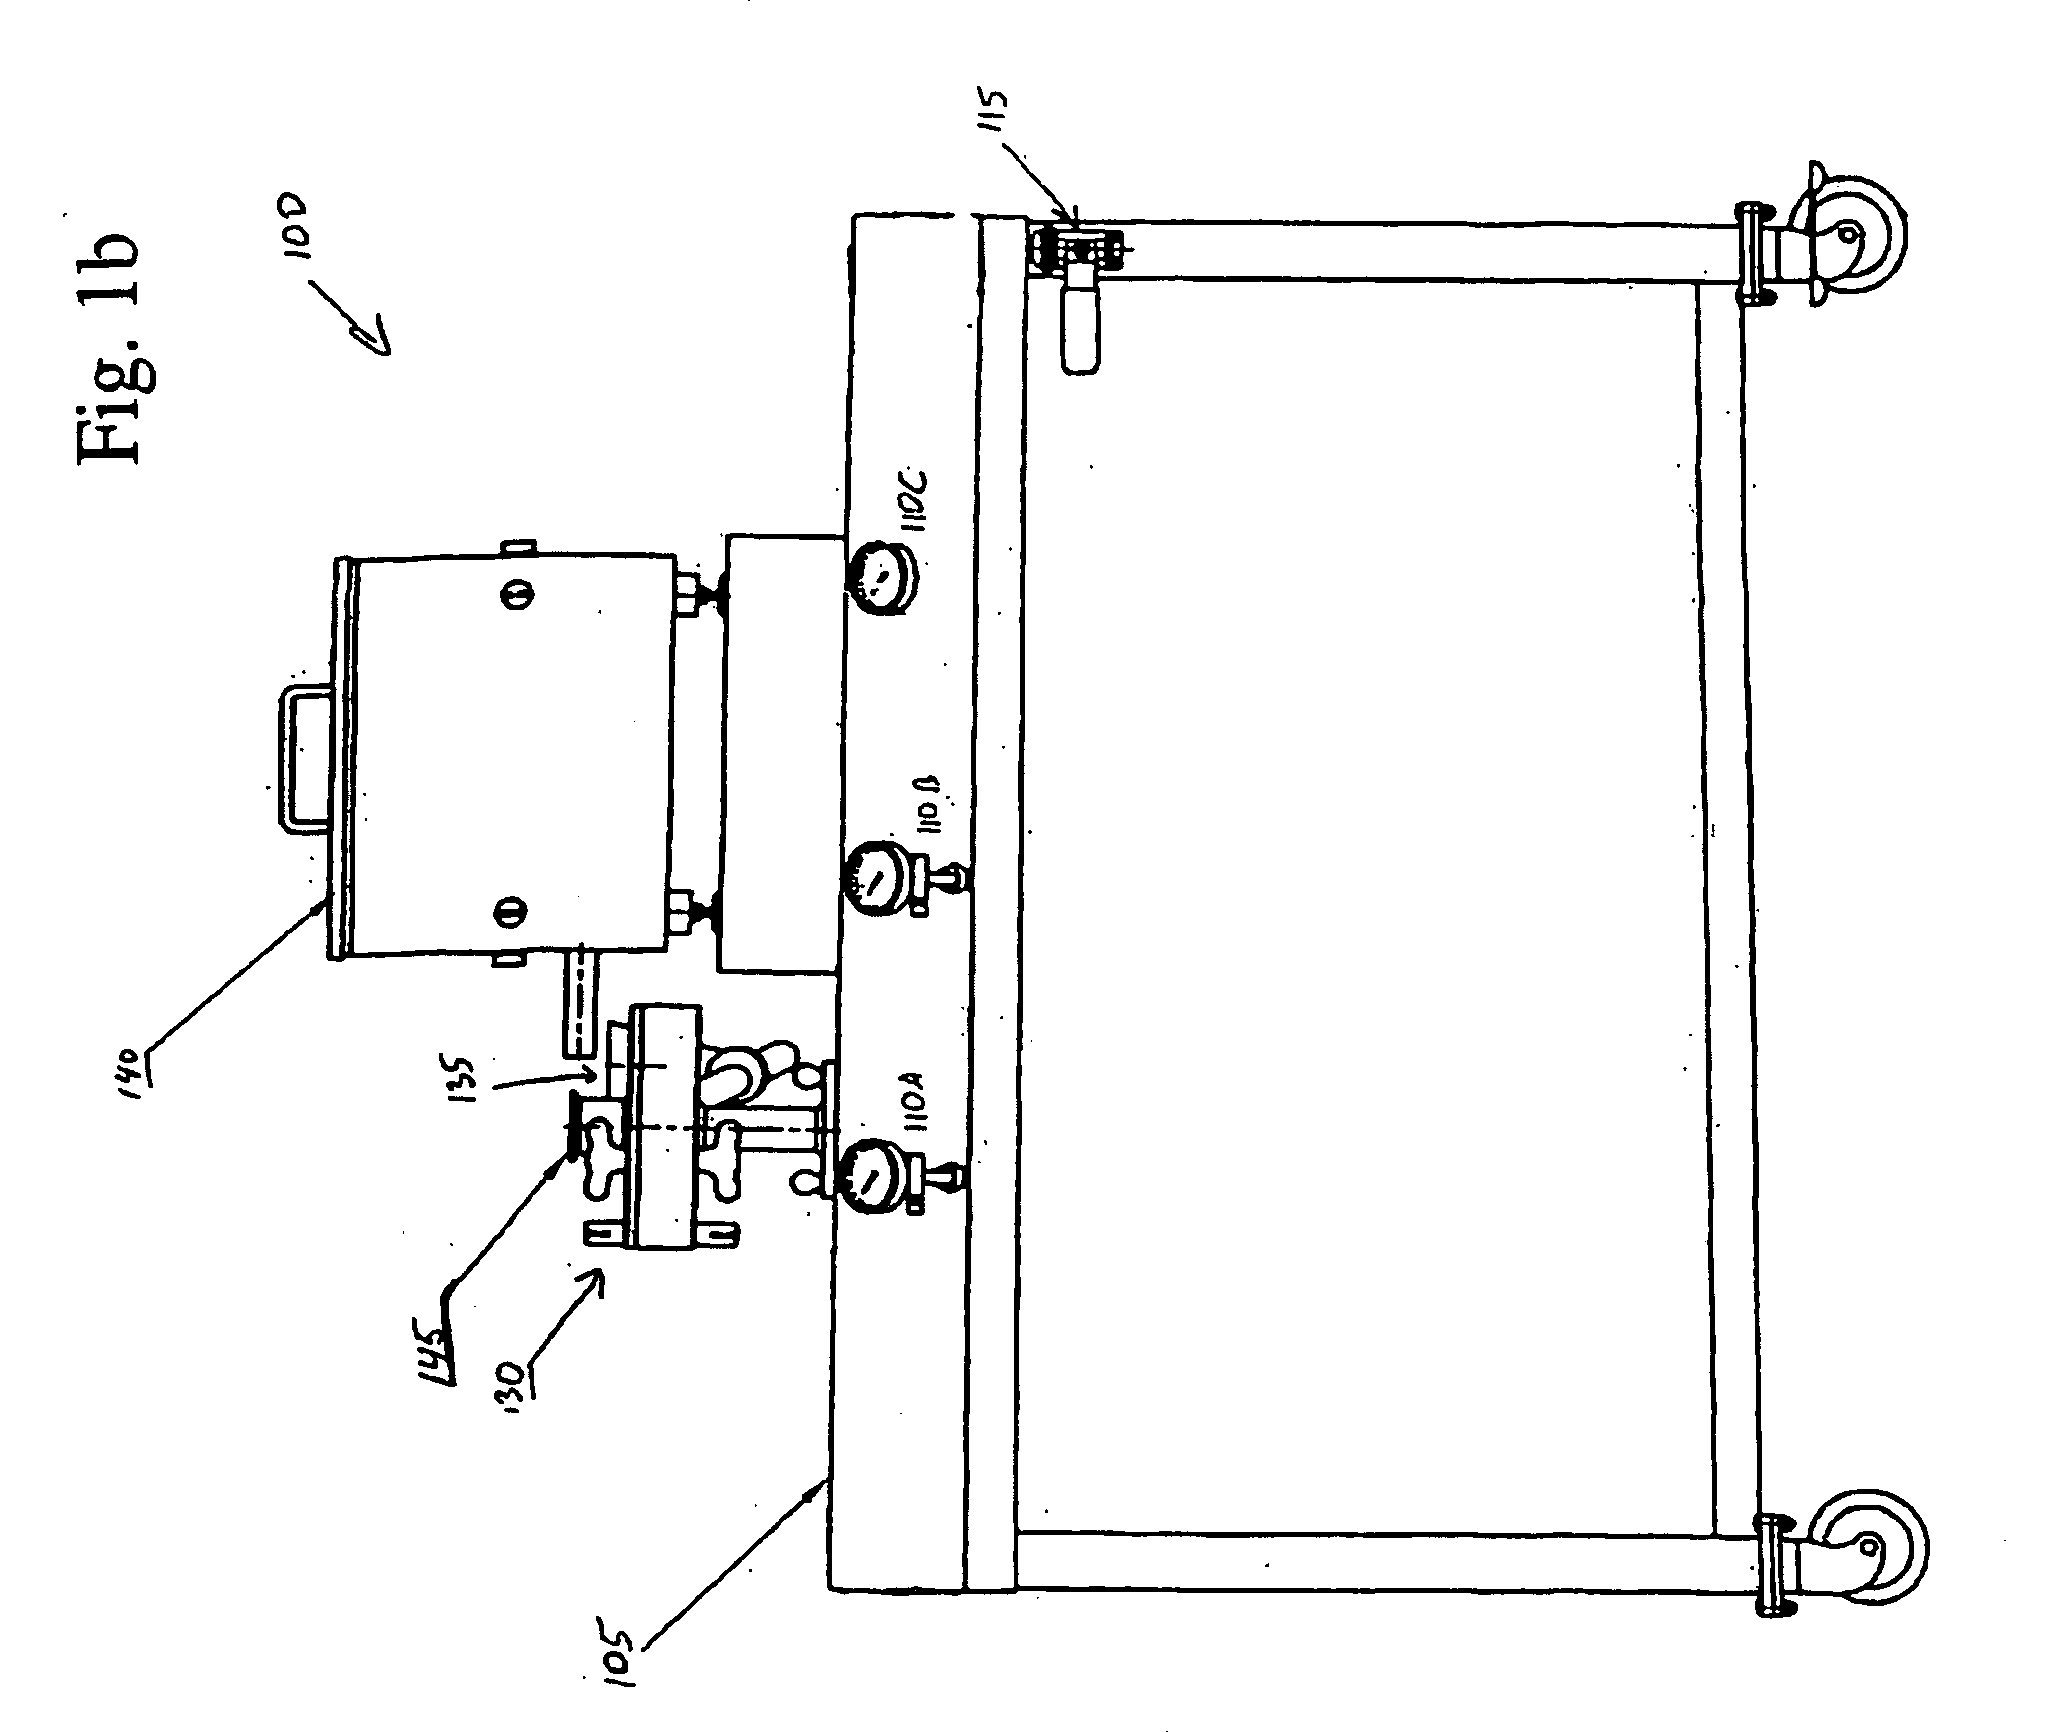 Dry-particle packaging systems and methods of making same